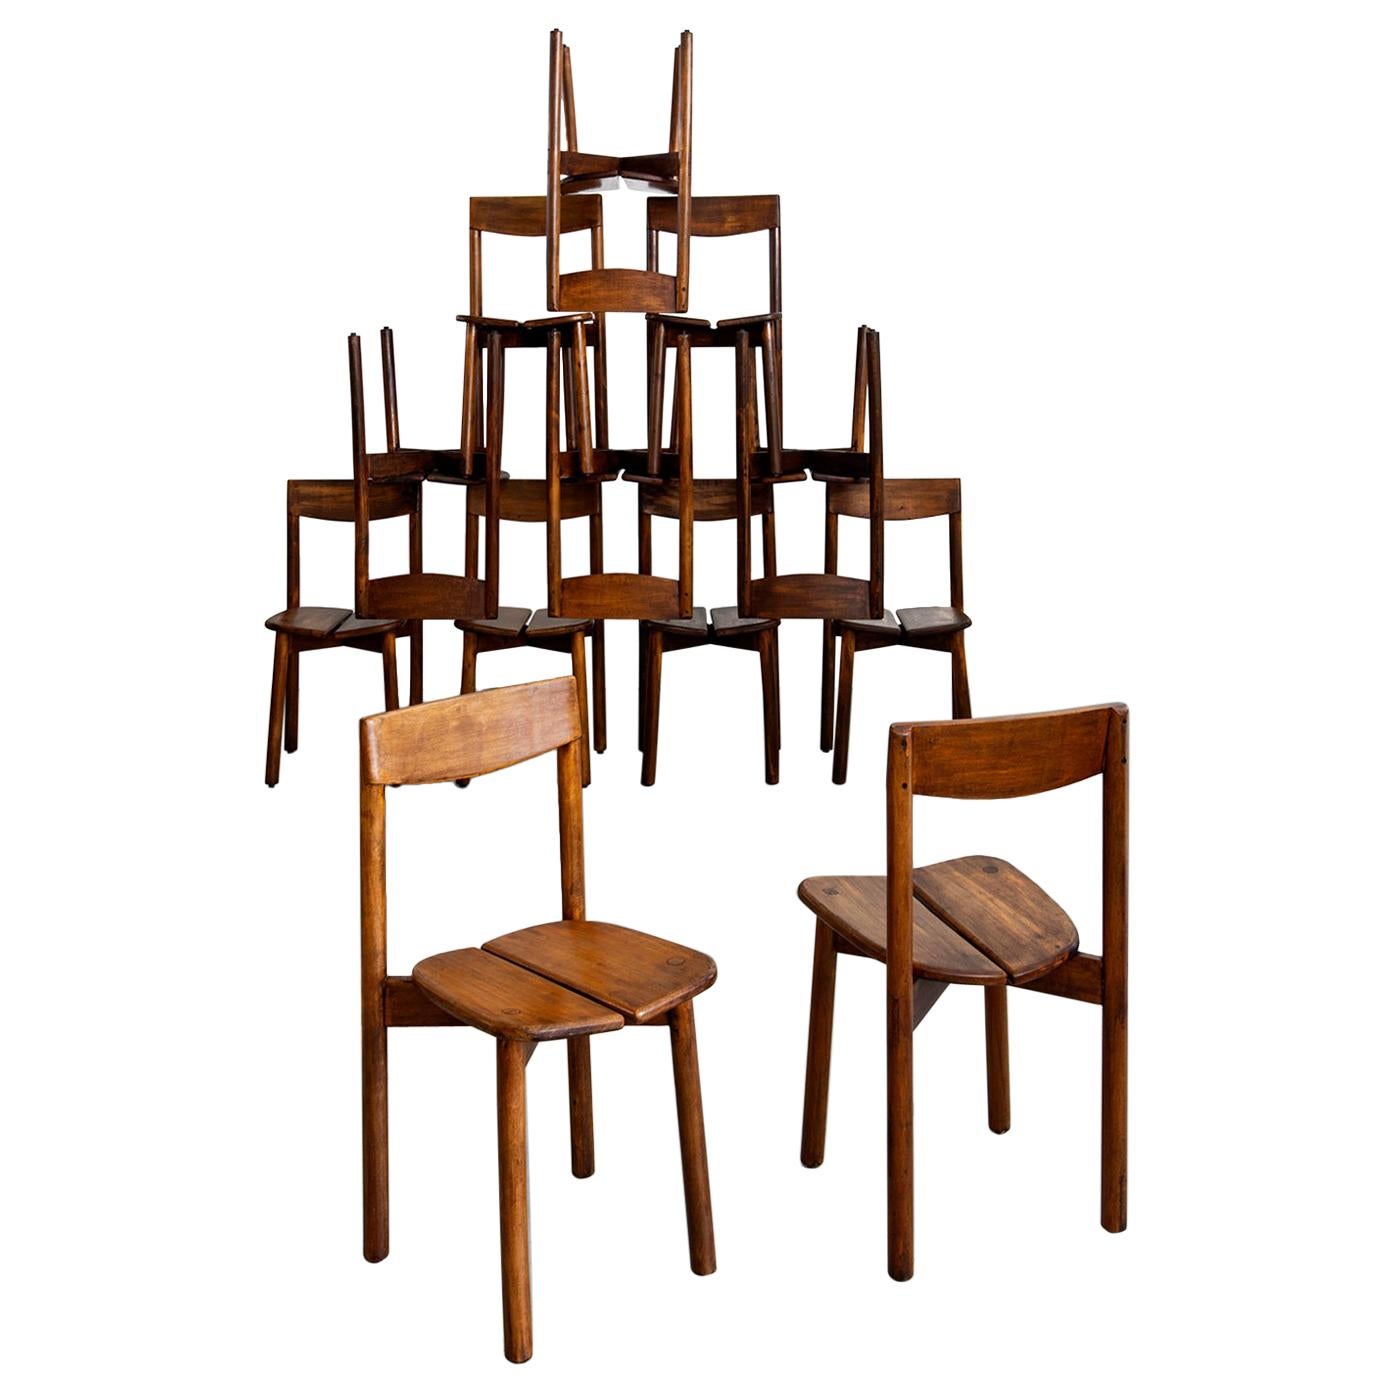 Pierre Gautier Delaye Dining Chairs, Set of 12